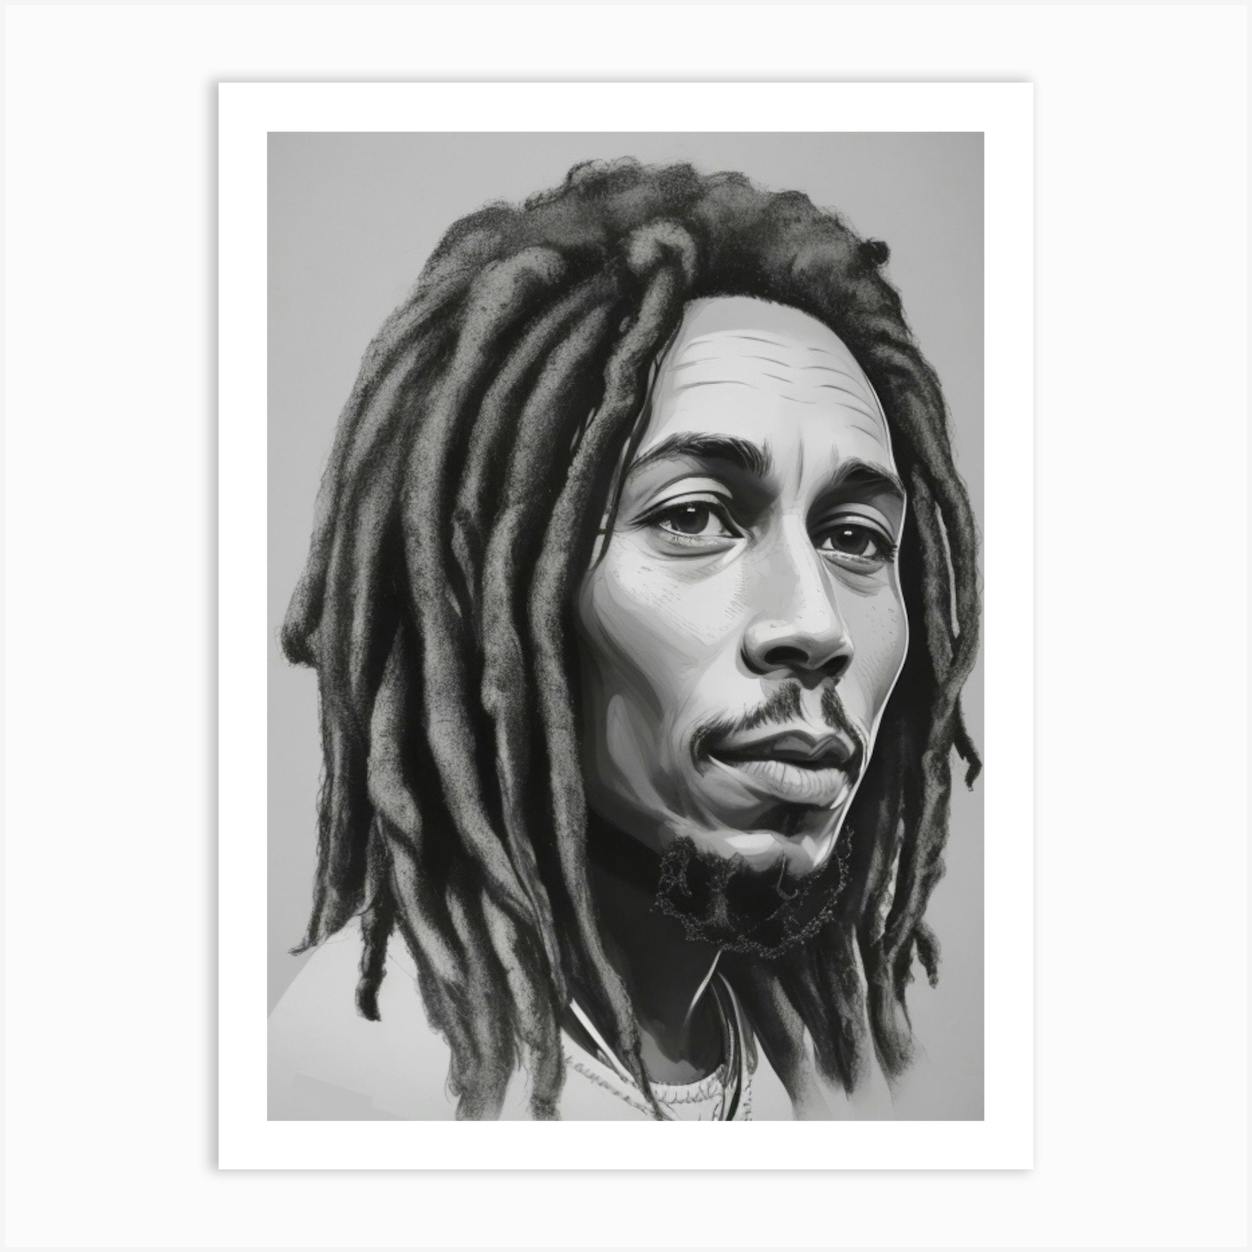 Bob Marley and Lion by SketchesByChris on DeviantArt